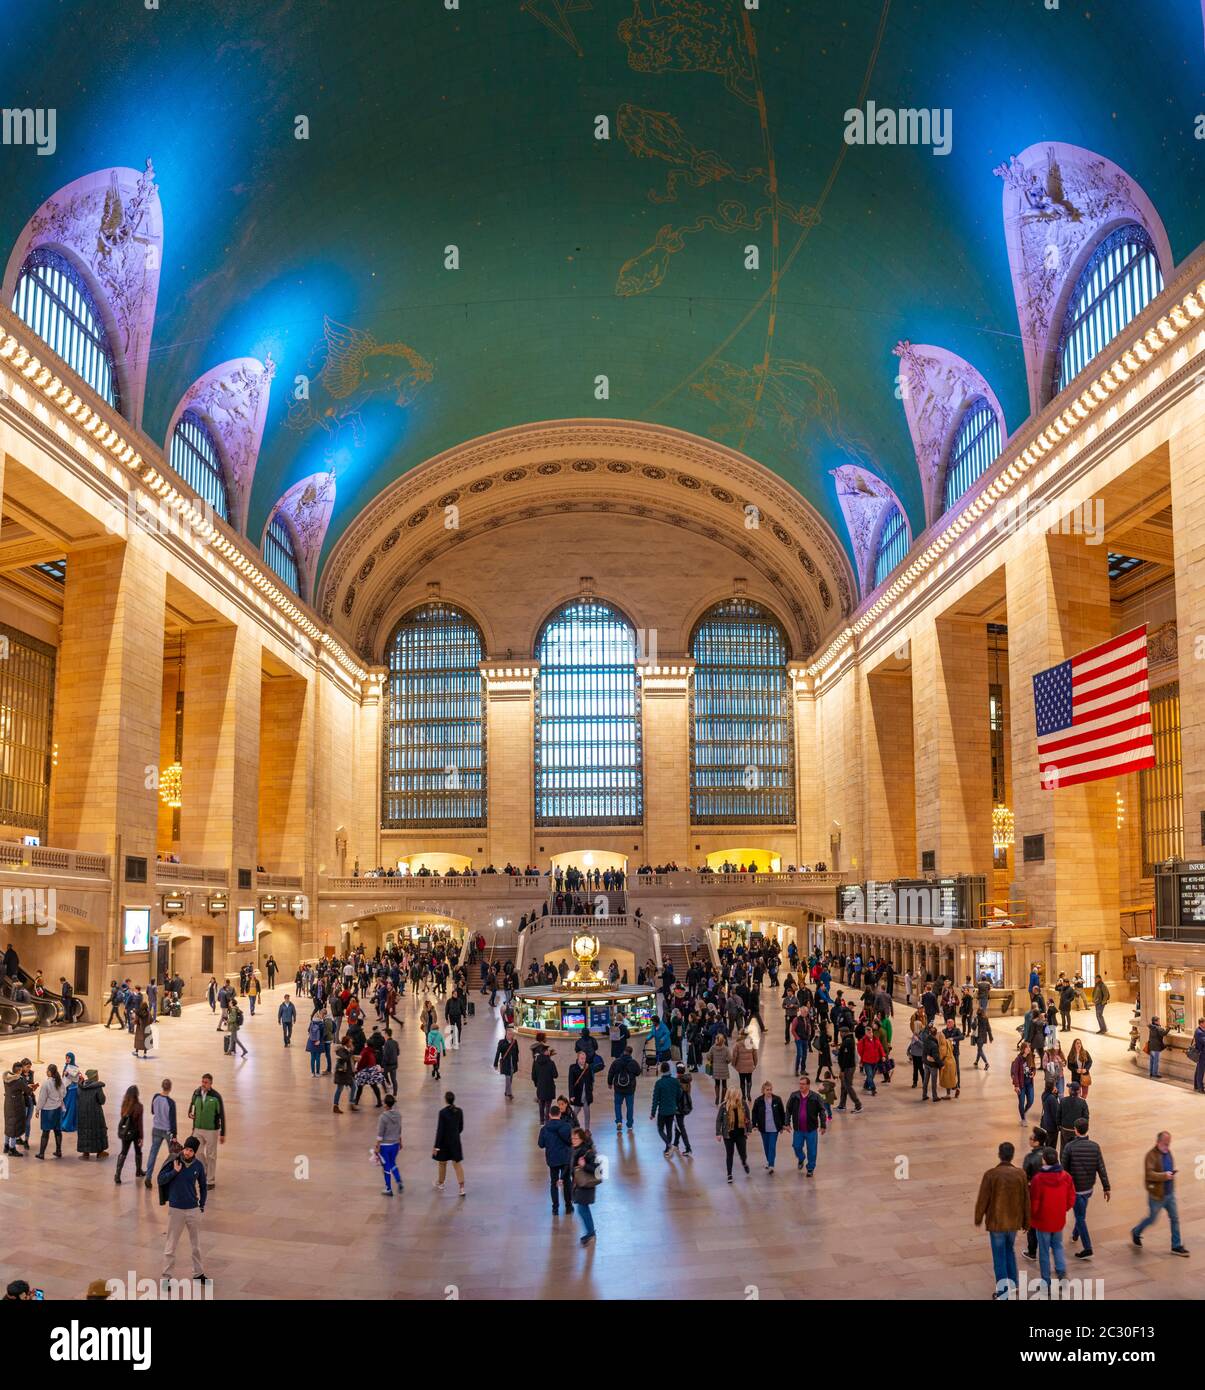 Interior view of Grand Central Station, Grand Central Terminal, Manhattan, New York City, New York State, USA Stock Photo